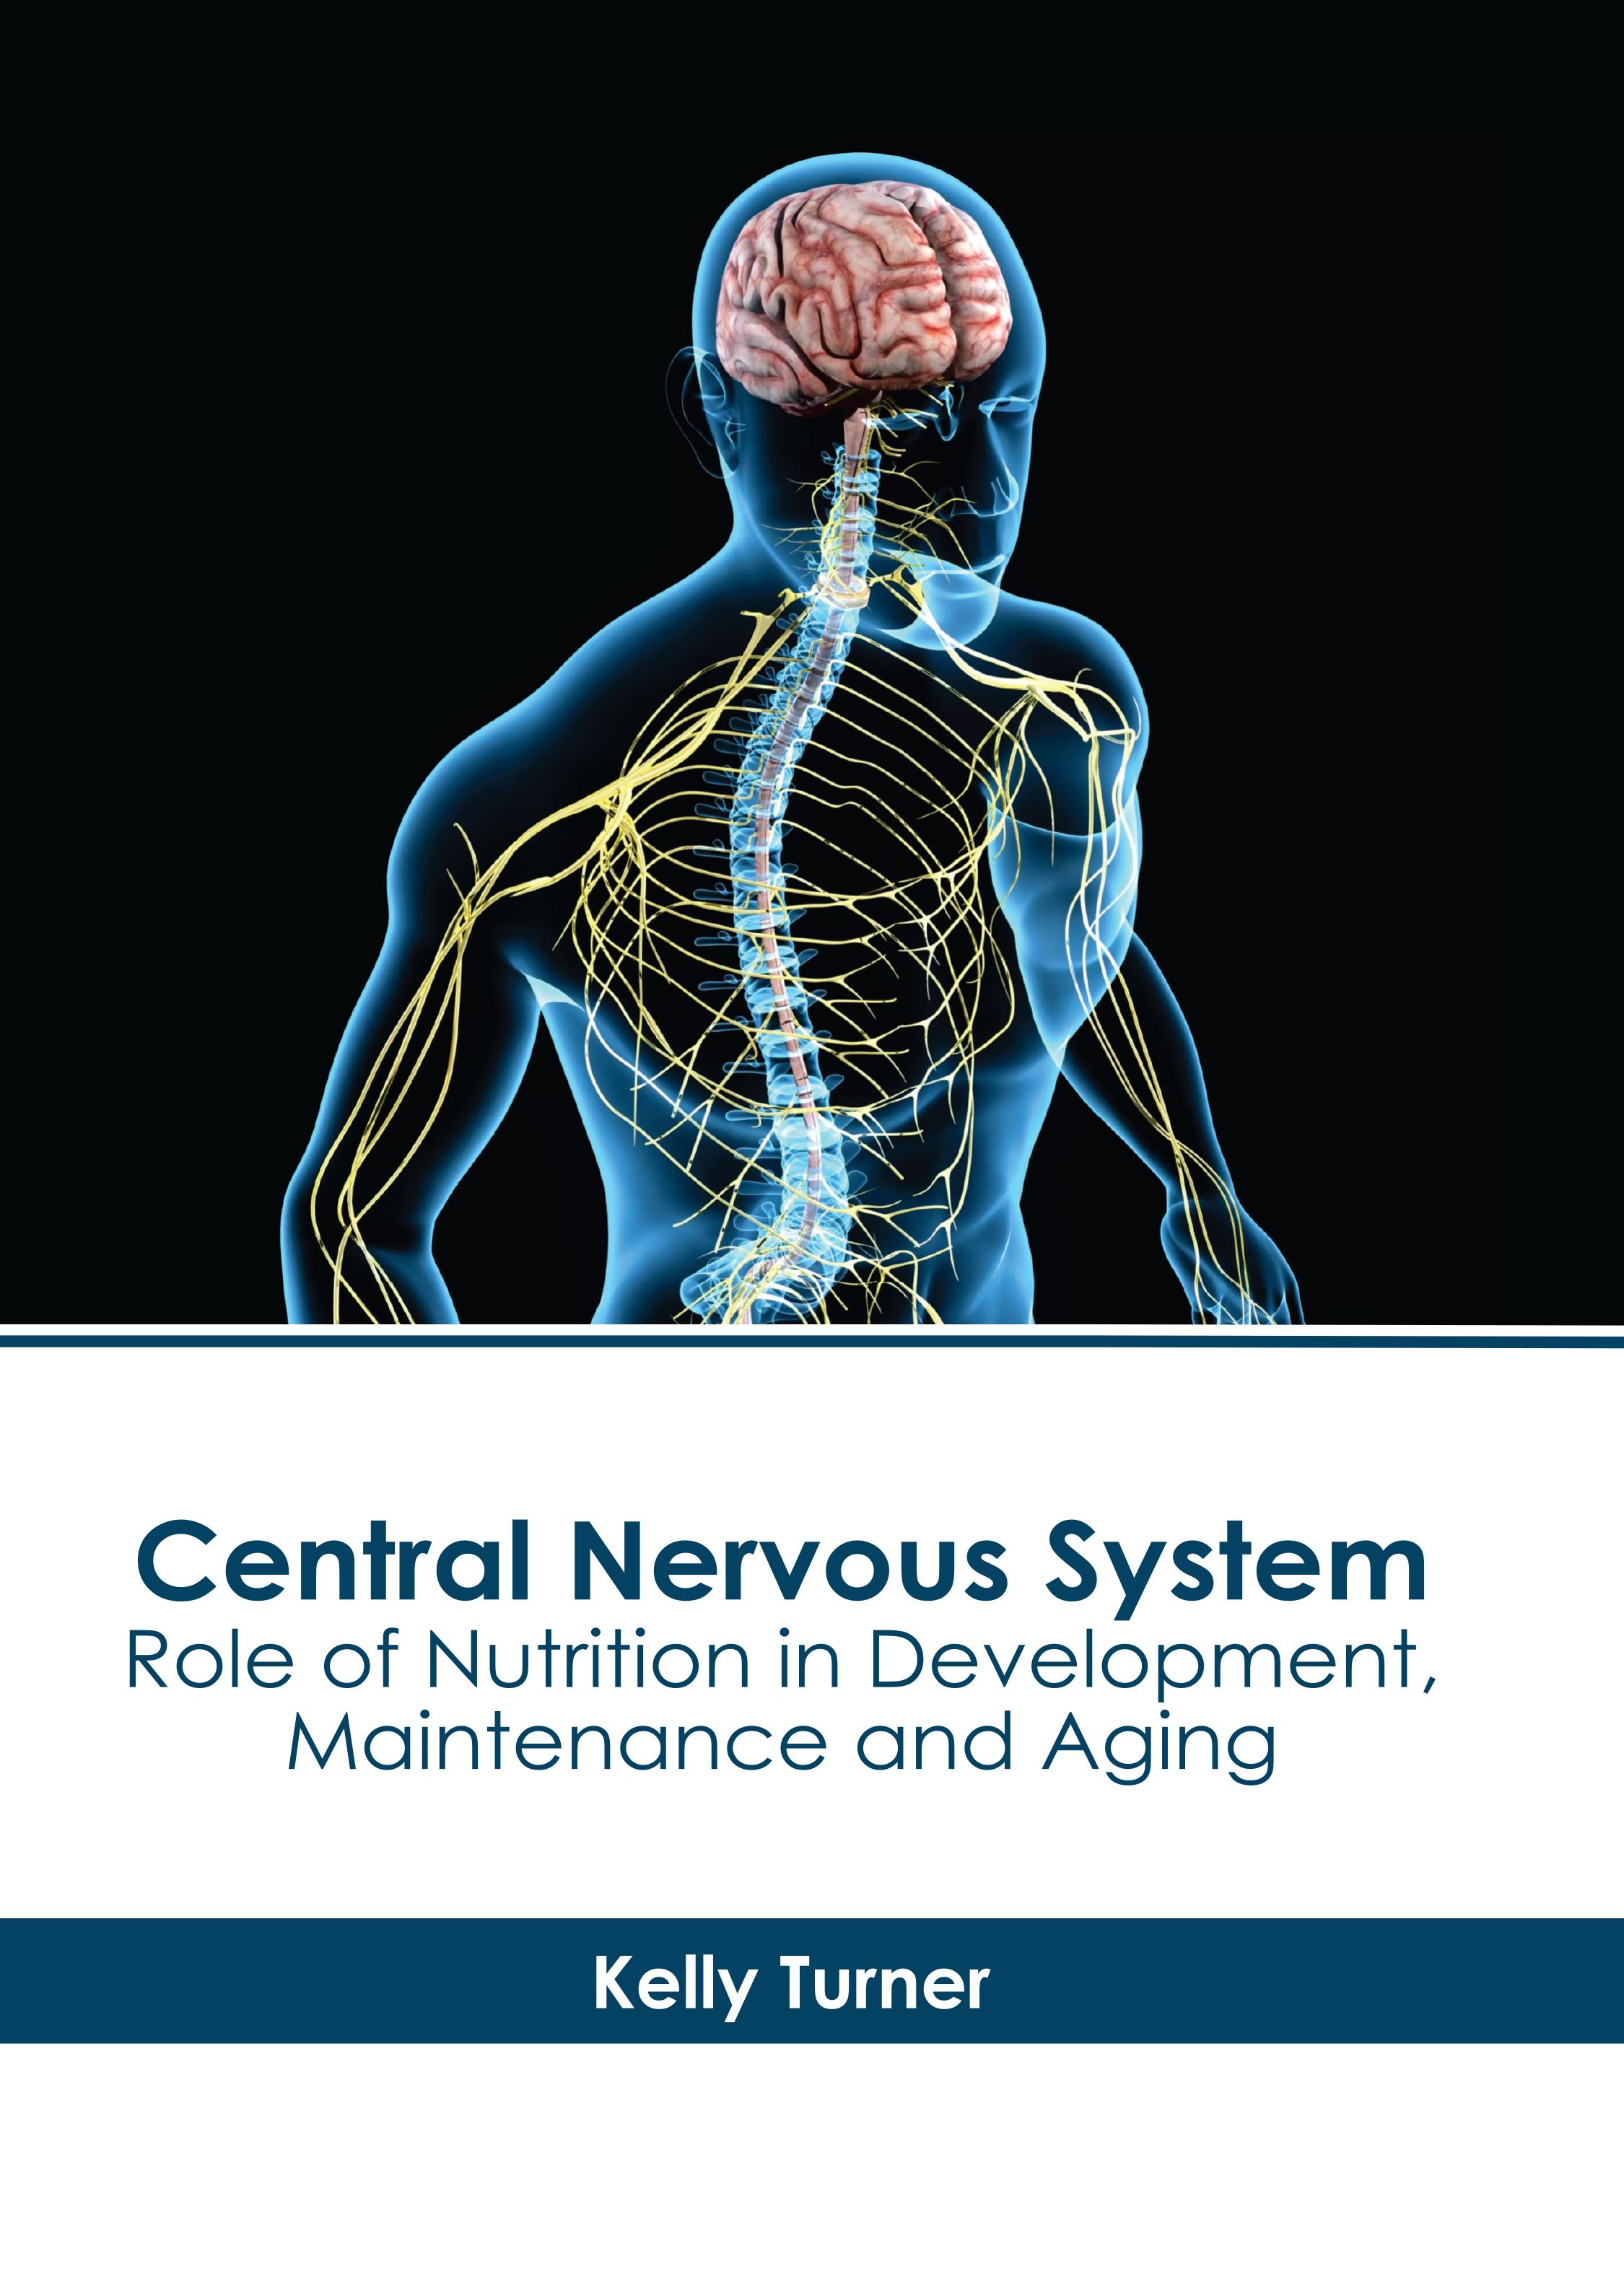 CENTRAL NERVOUS SYSTEM: ROLE OF NUTRITION IN DEVELOPMENT, MAINTENANCE AND AGING